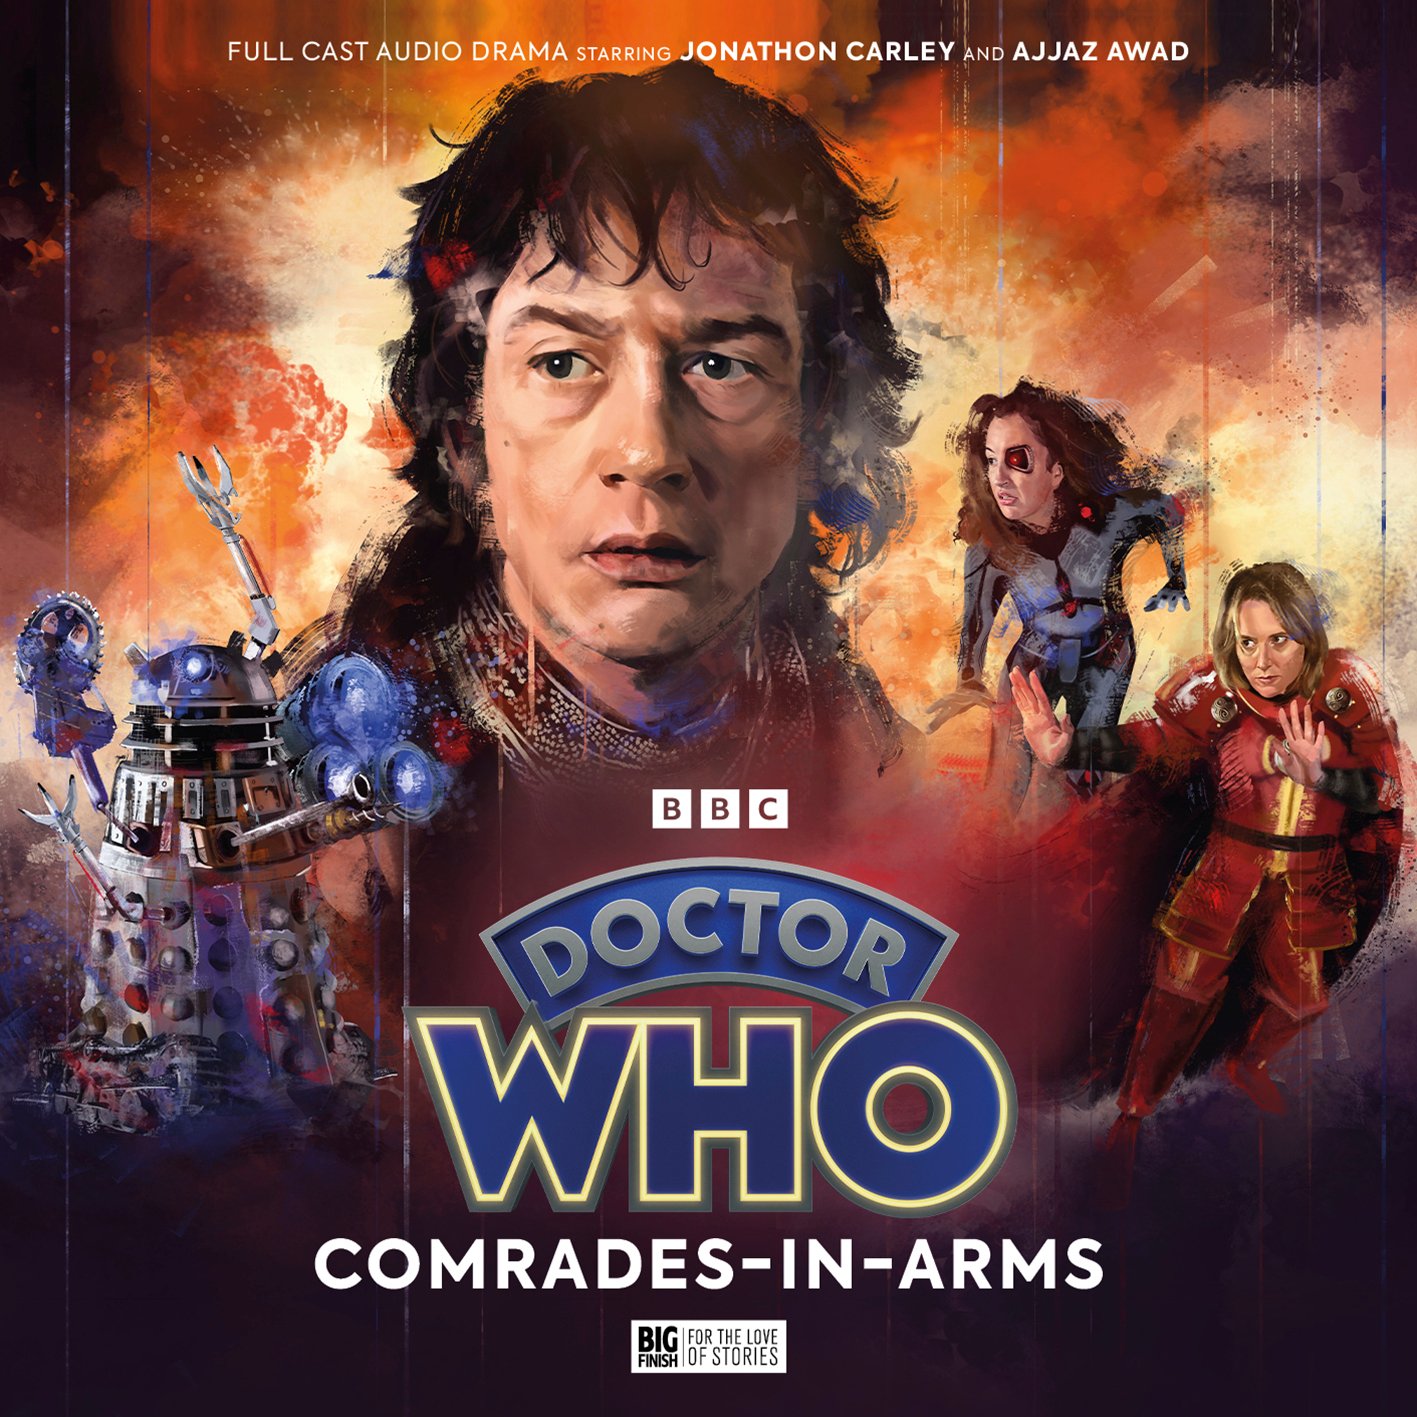 Out Now: 10 Years On, The War Doctor Returns in Comrades-in-Arms from Big Finish